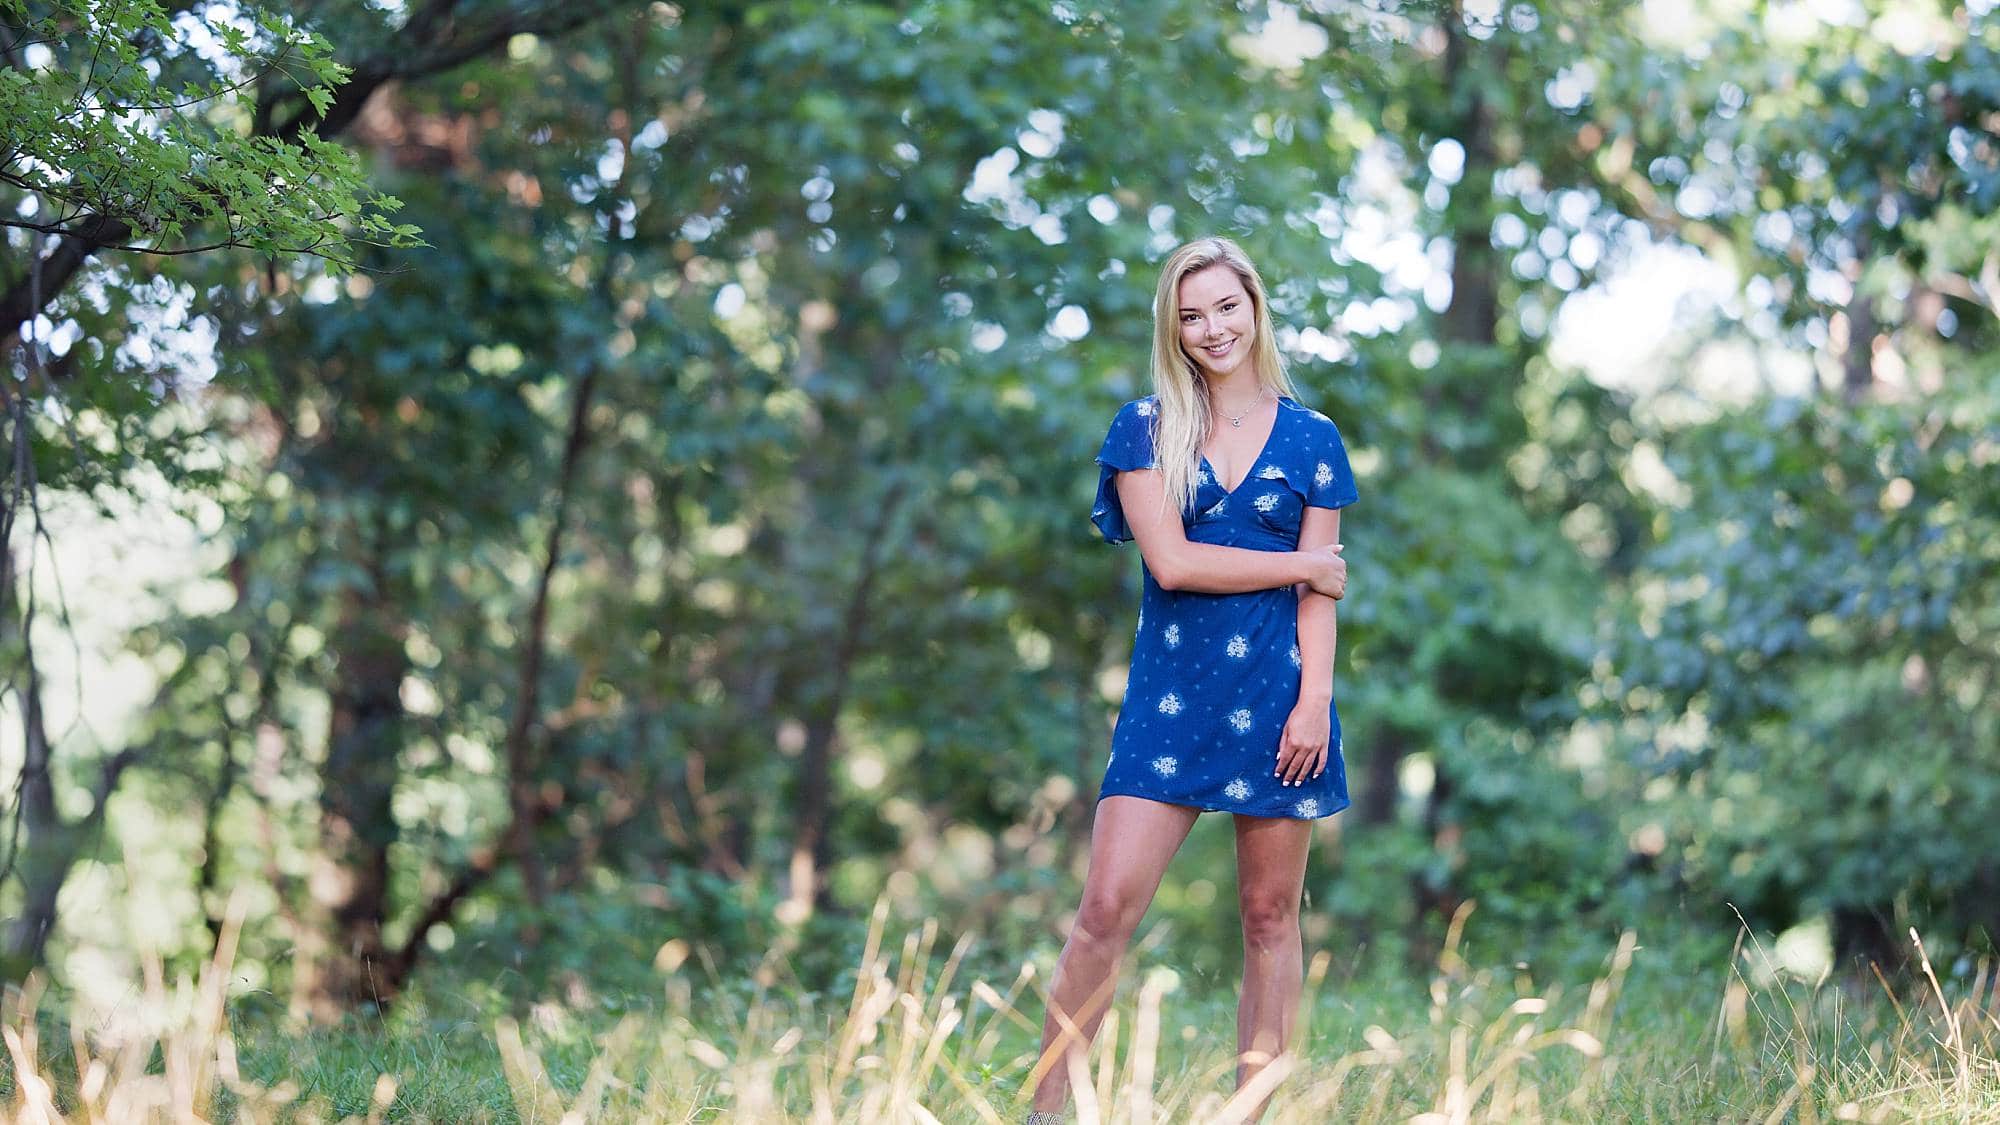 image of senior girl with blonde hair wearing a short blue dress with white flowers and standing in a wooded and grassy field